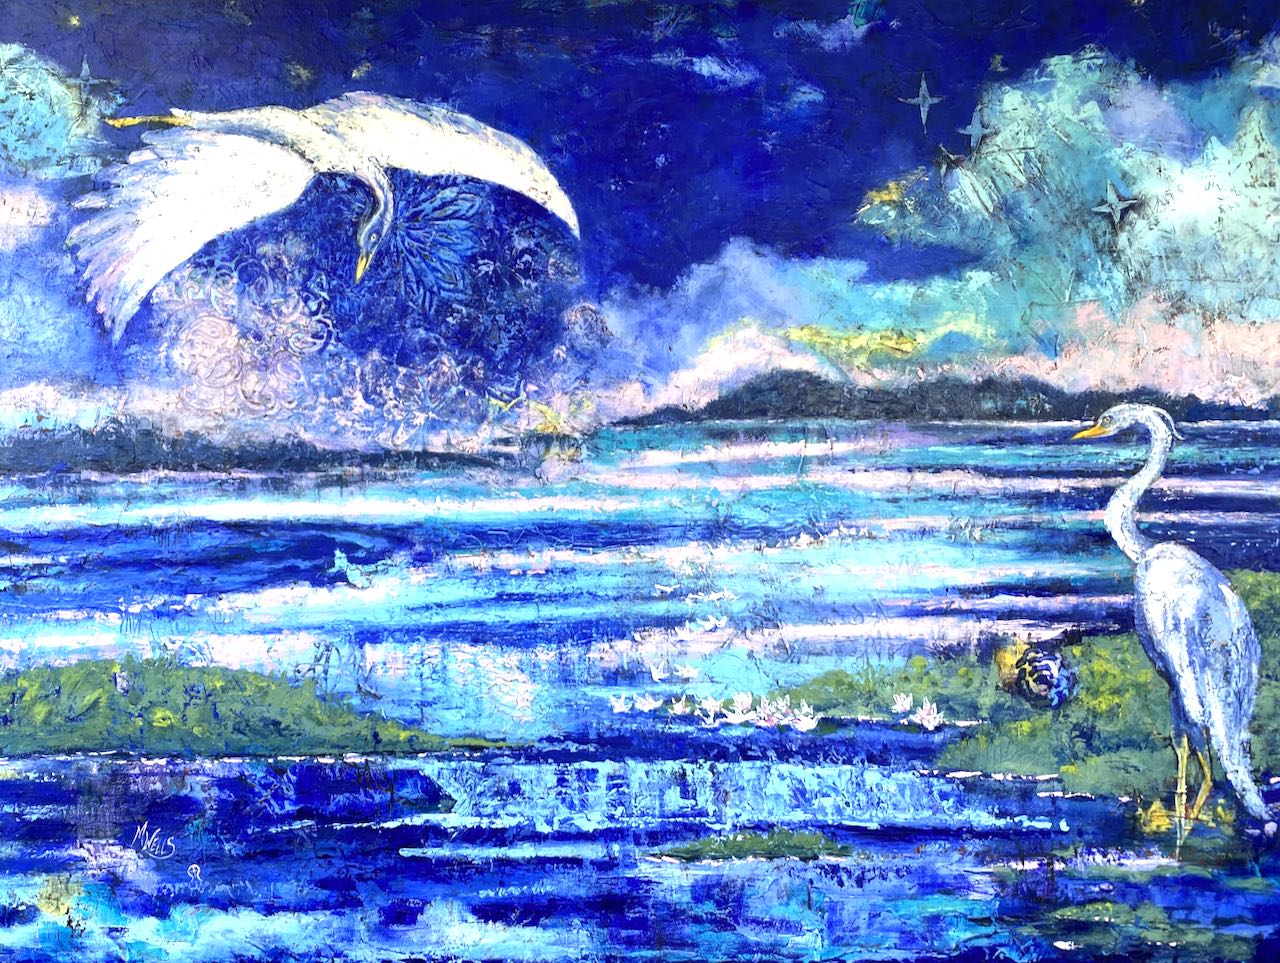 "Blue Heron Requiem" oil painting by Marilyn Wells 30" x 40" oil and cold wax